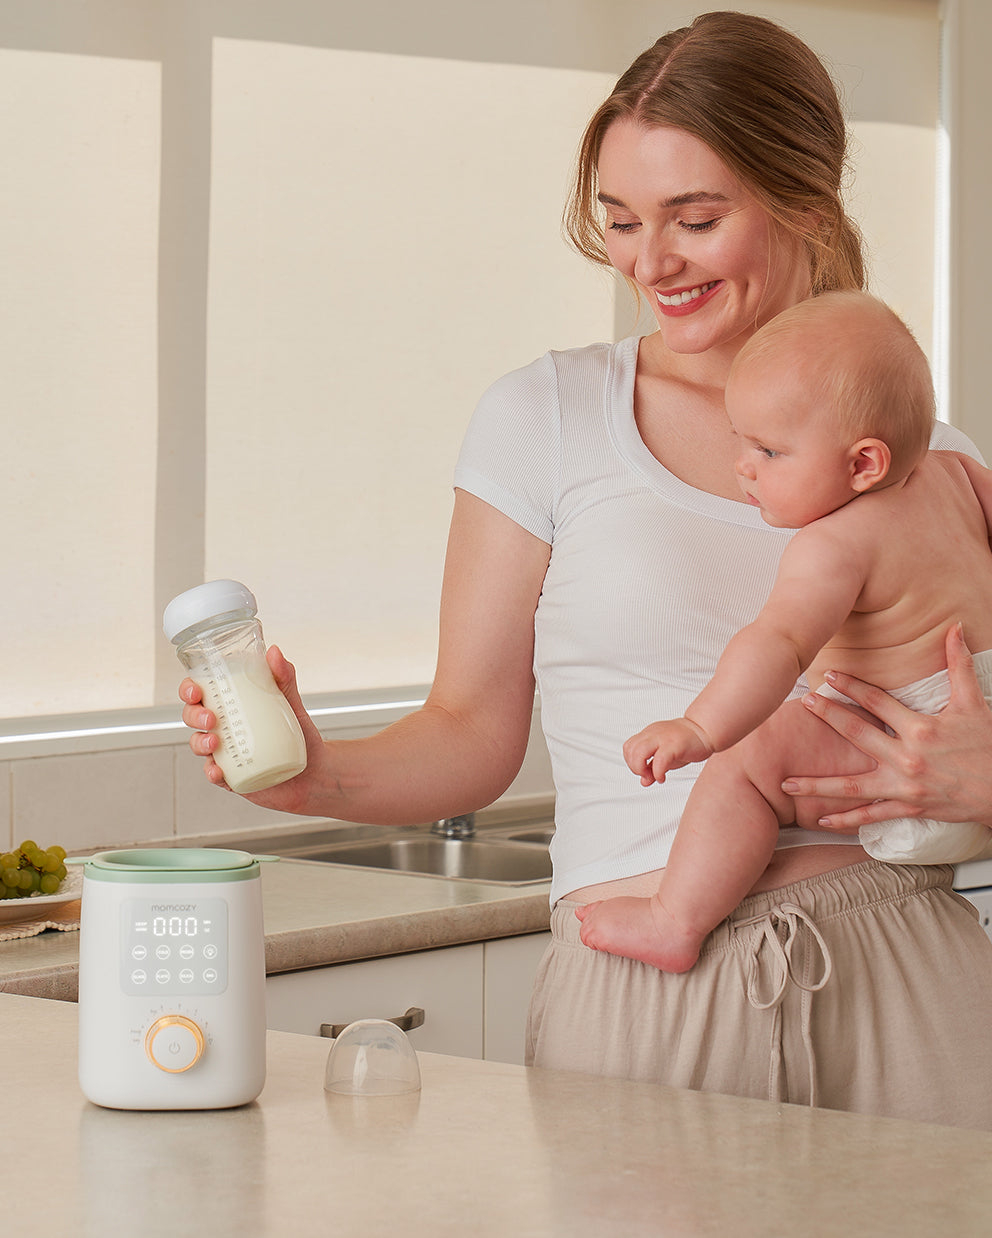 Momcozy Retain Nutrients Bottle Warmer, 9-in-1 Baby Bottle Warmer with  Night Light, Accurate Temperature to Preserve Fullest Nutrients in Breast  Milk